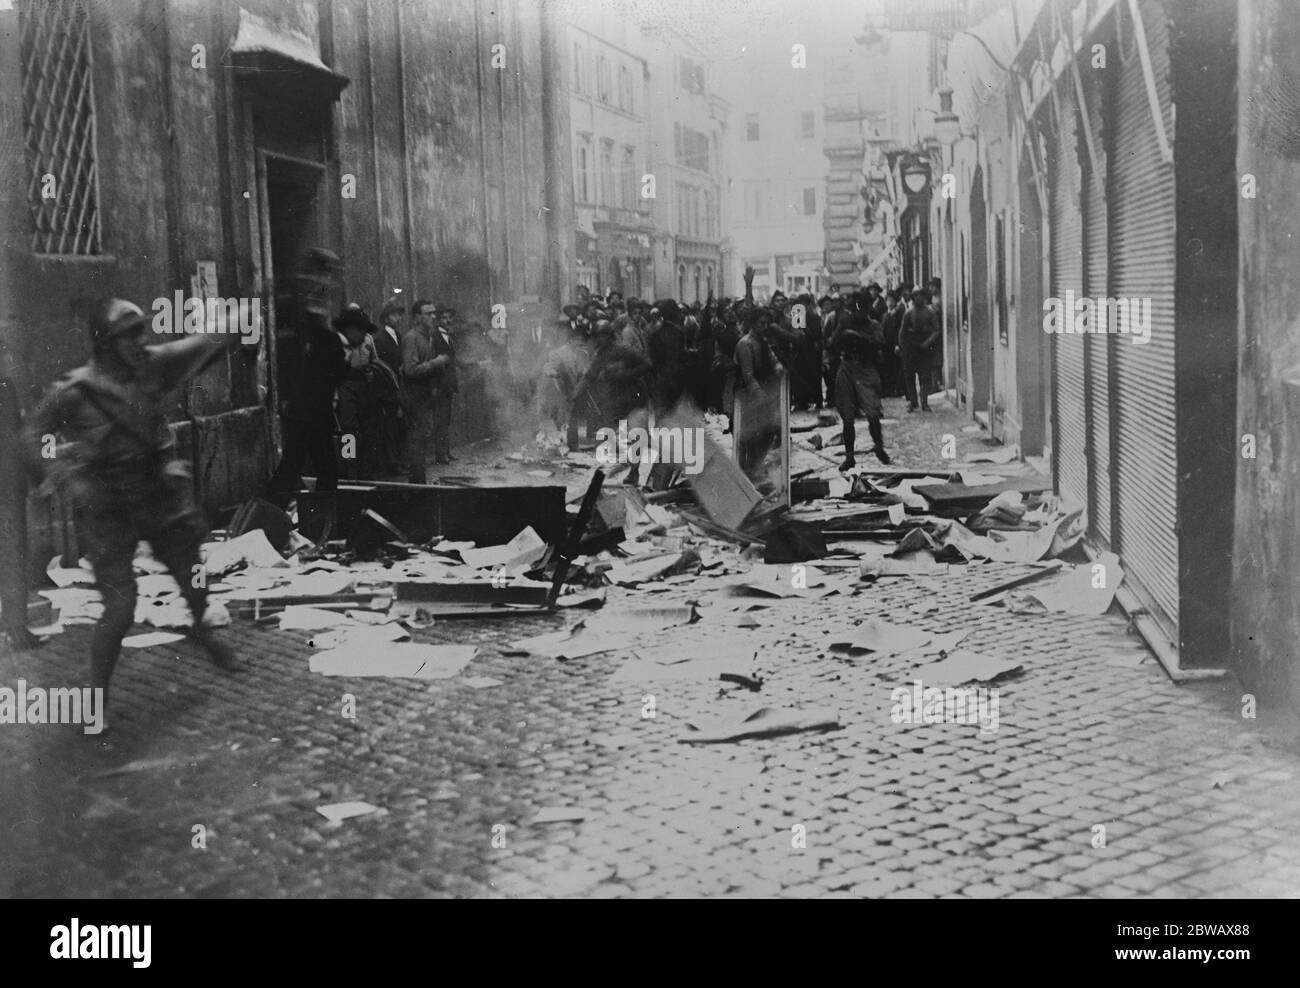 First Picture of Fascisti Arrival in Rome Fascisti making bonfires in the streets with newspaper placards on their arrival in Rome , Italy 2nd November 1922 Stock Photo